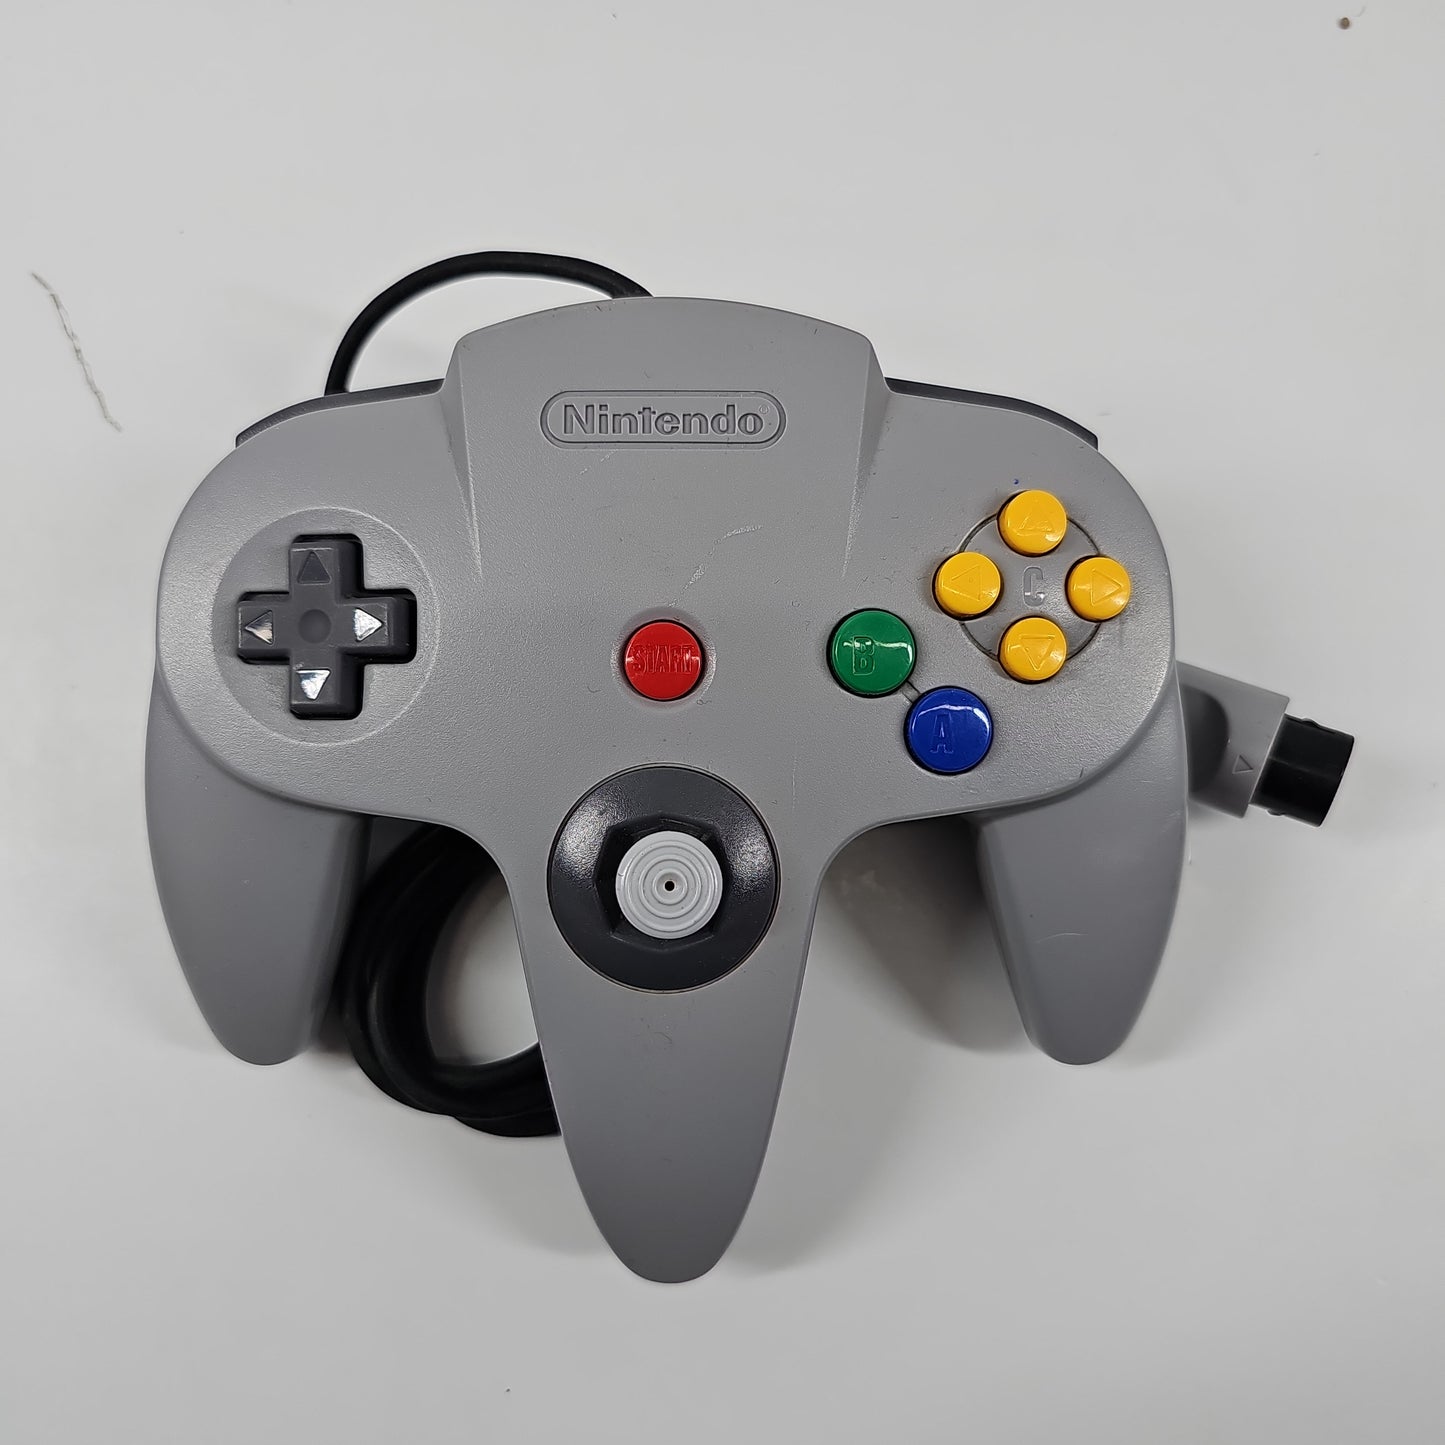 Nintendo 64 N64 Video Game Console NUS-001 Charcoal